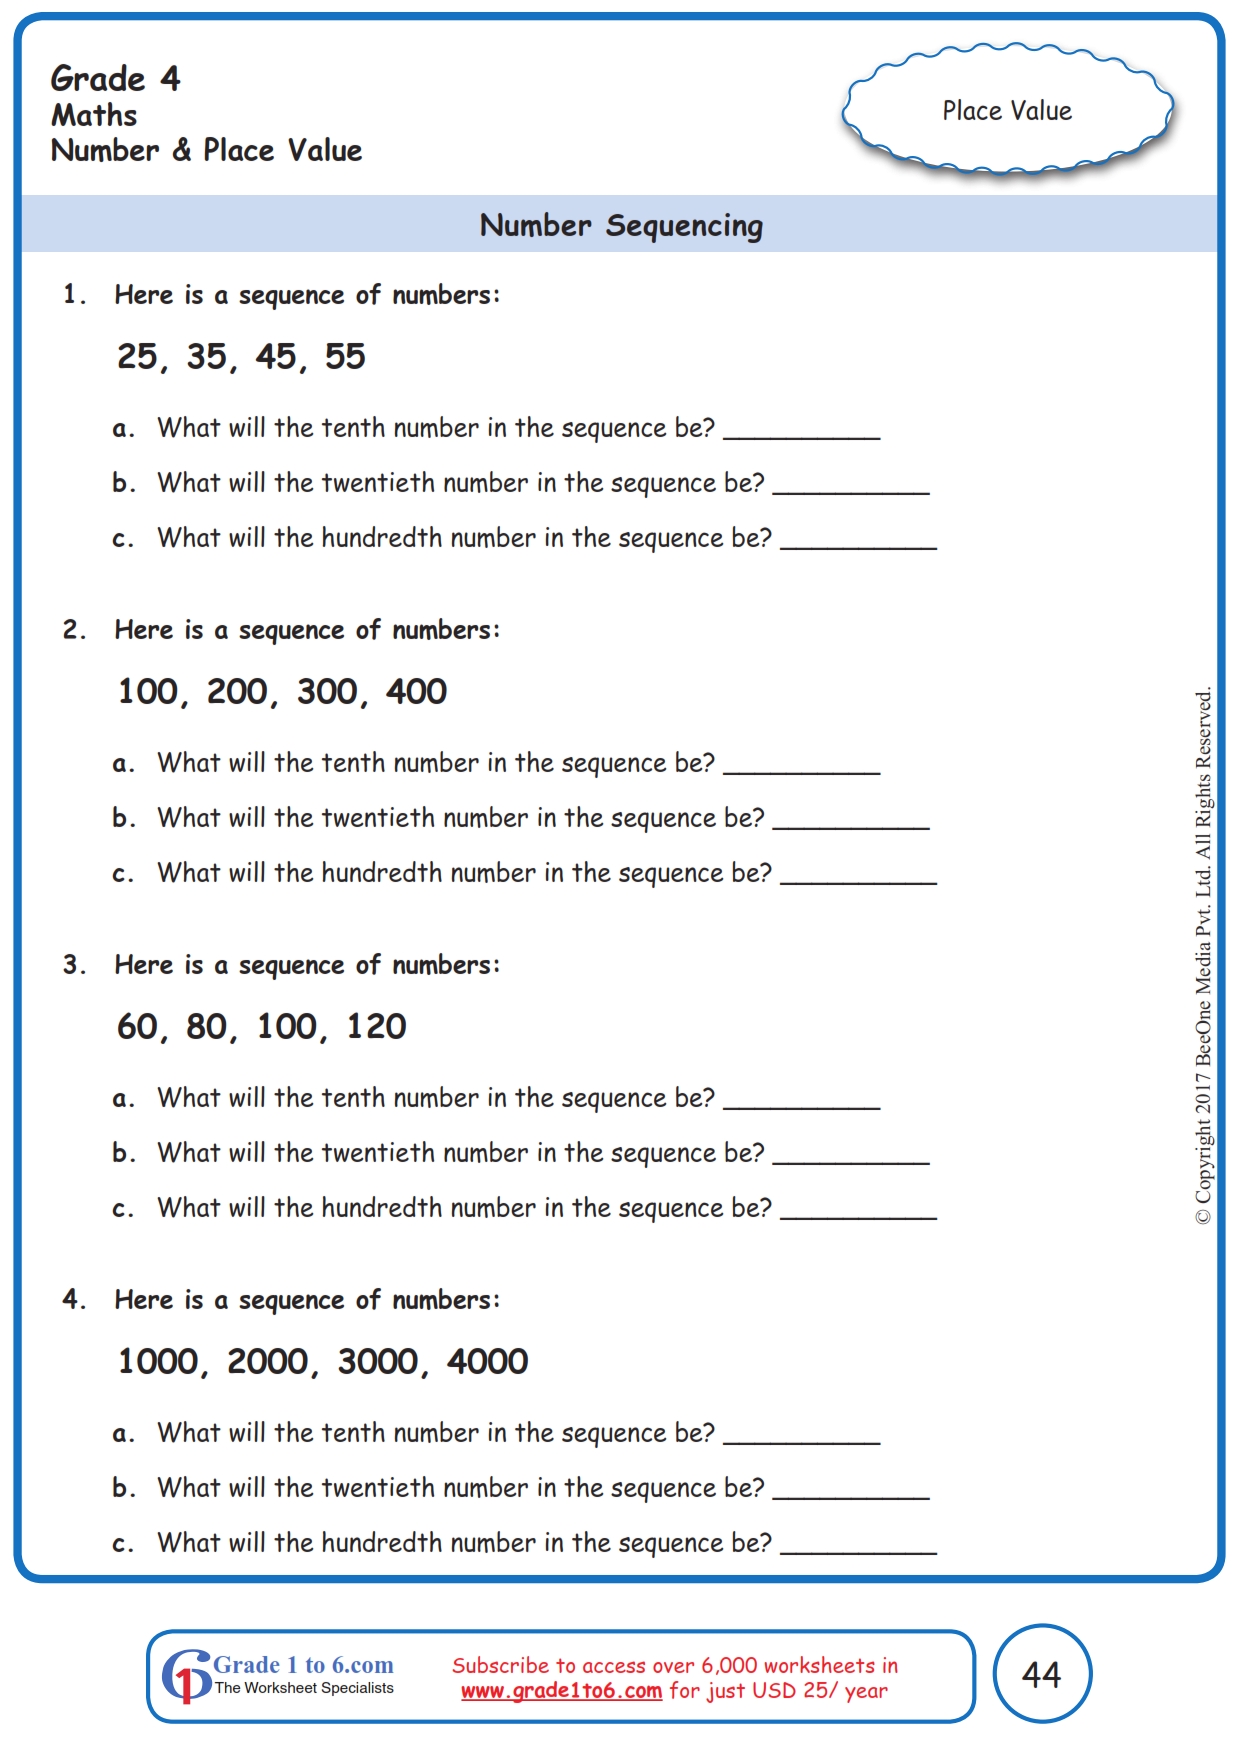 Grade 4 Number Sequences Worksheets www grade1to6